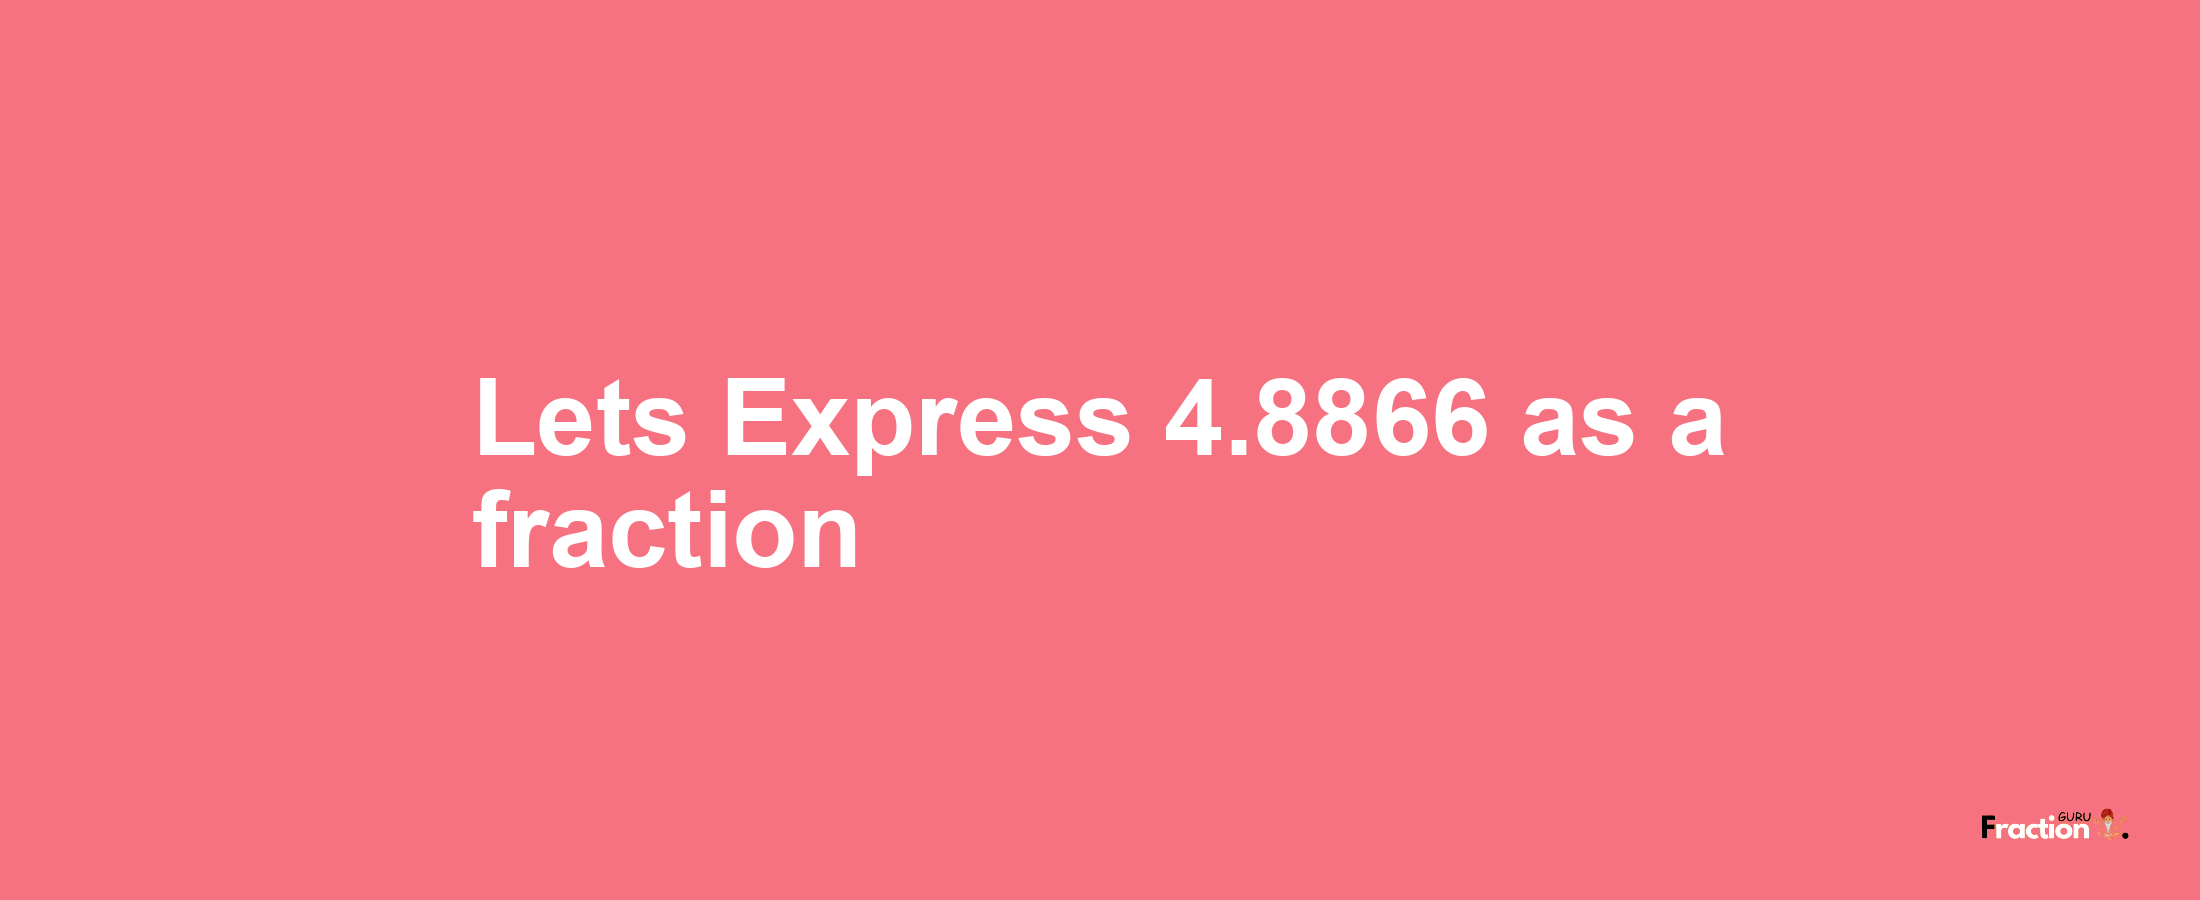 Lets Express 4.8866 as afraction